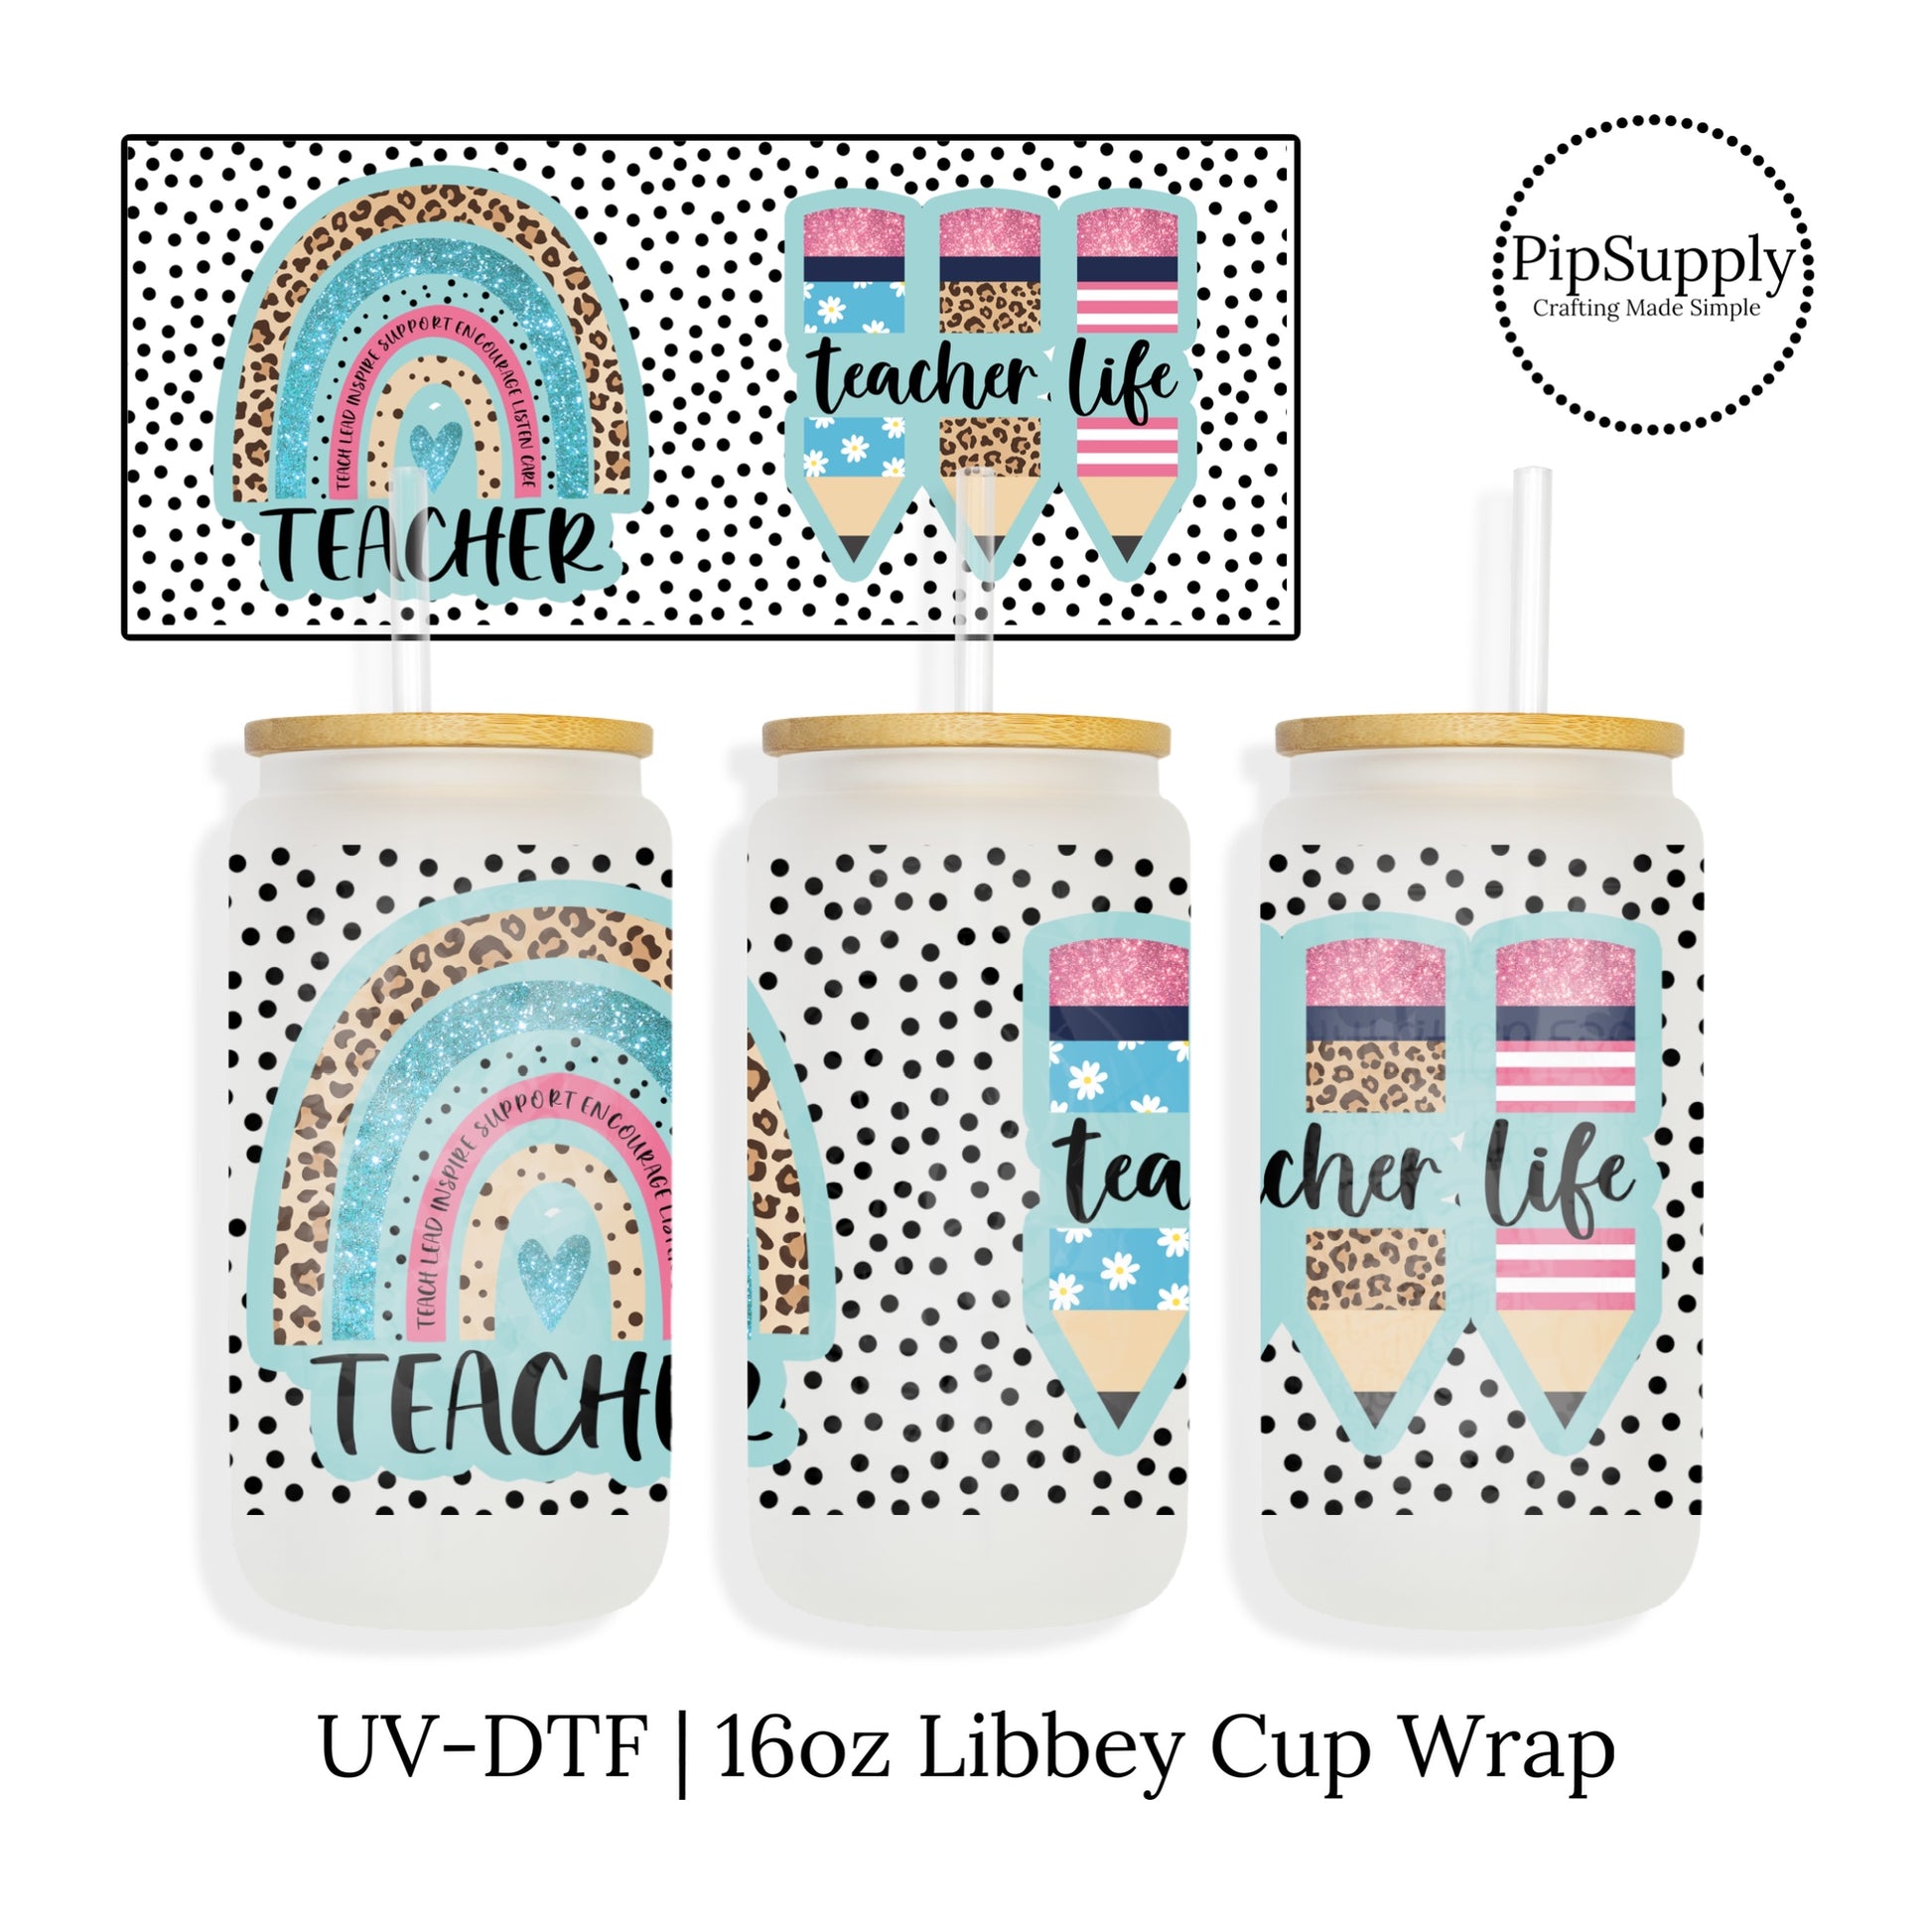 DIY Teacher Gift - Libbey cup sticker wrap with leopard print, stripes, and daisies, as well as the phrase "Teacher Life".